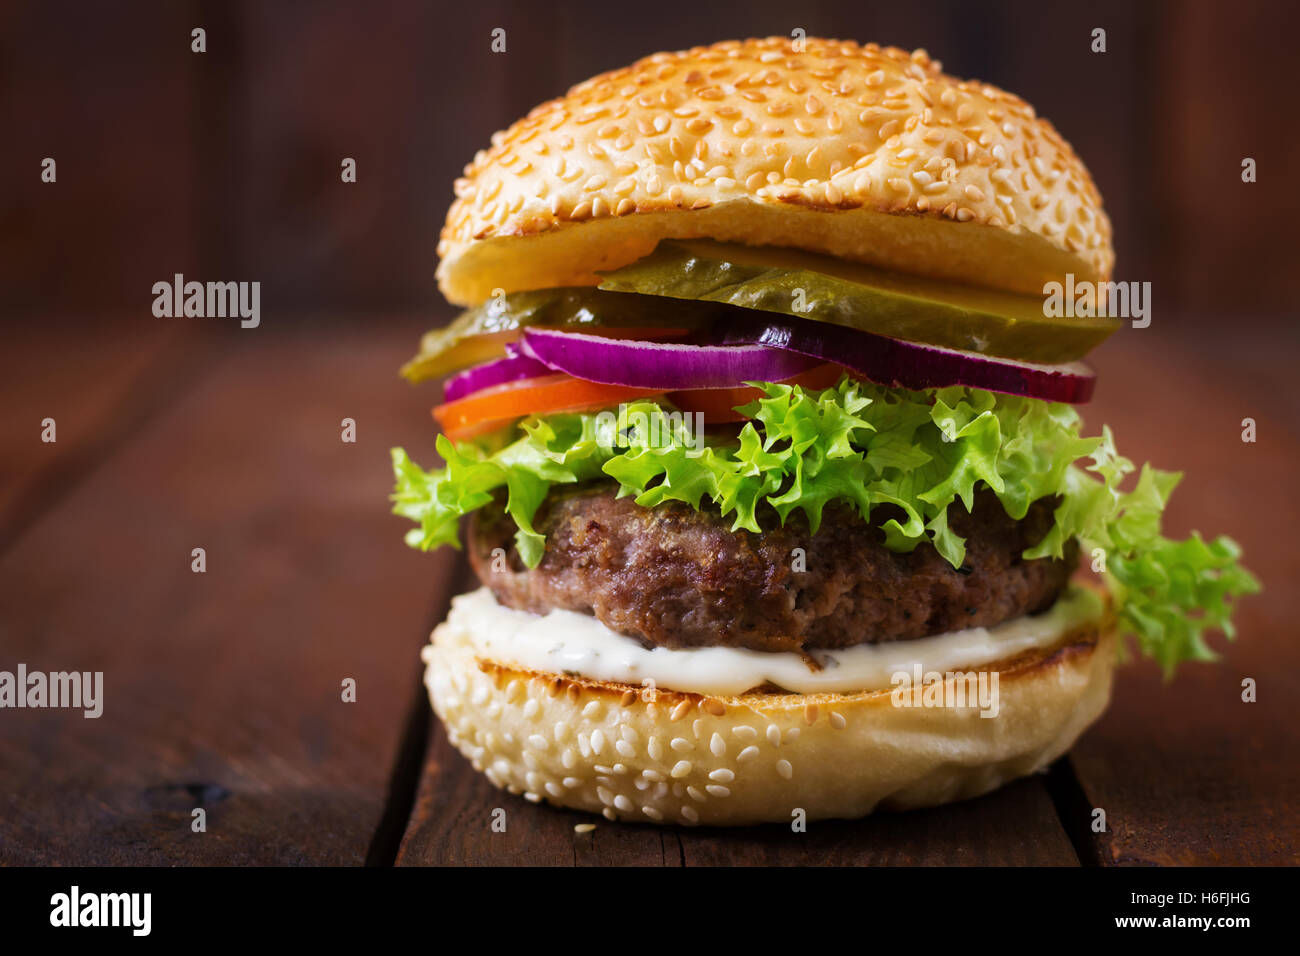 Big sandwich - hamburger burger with beef, pickles, tomato and tartar sauce on wooden background. Stock Photo